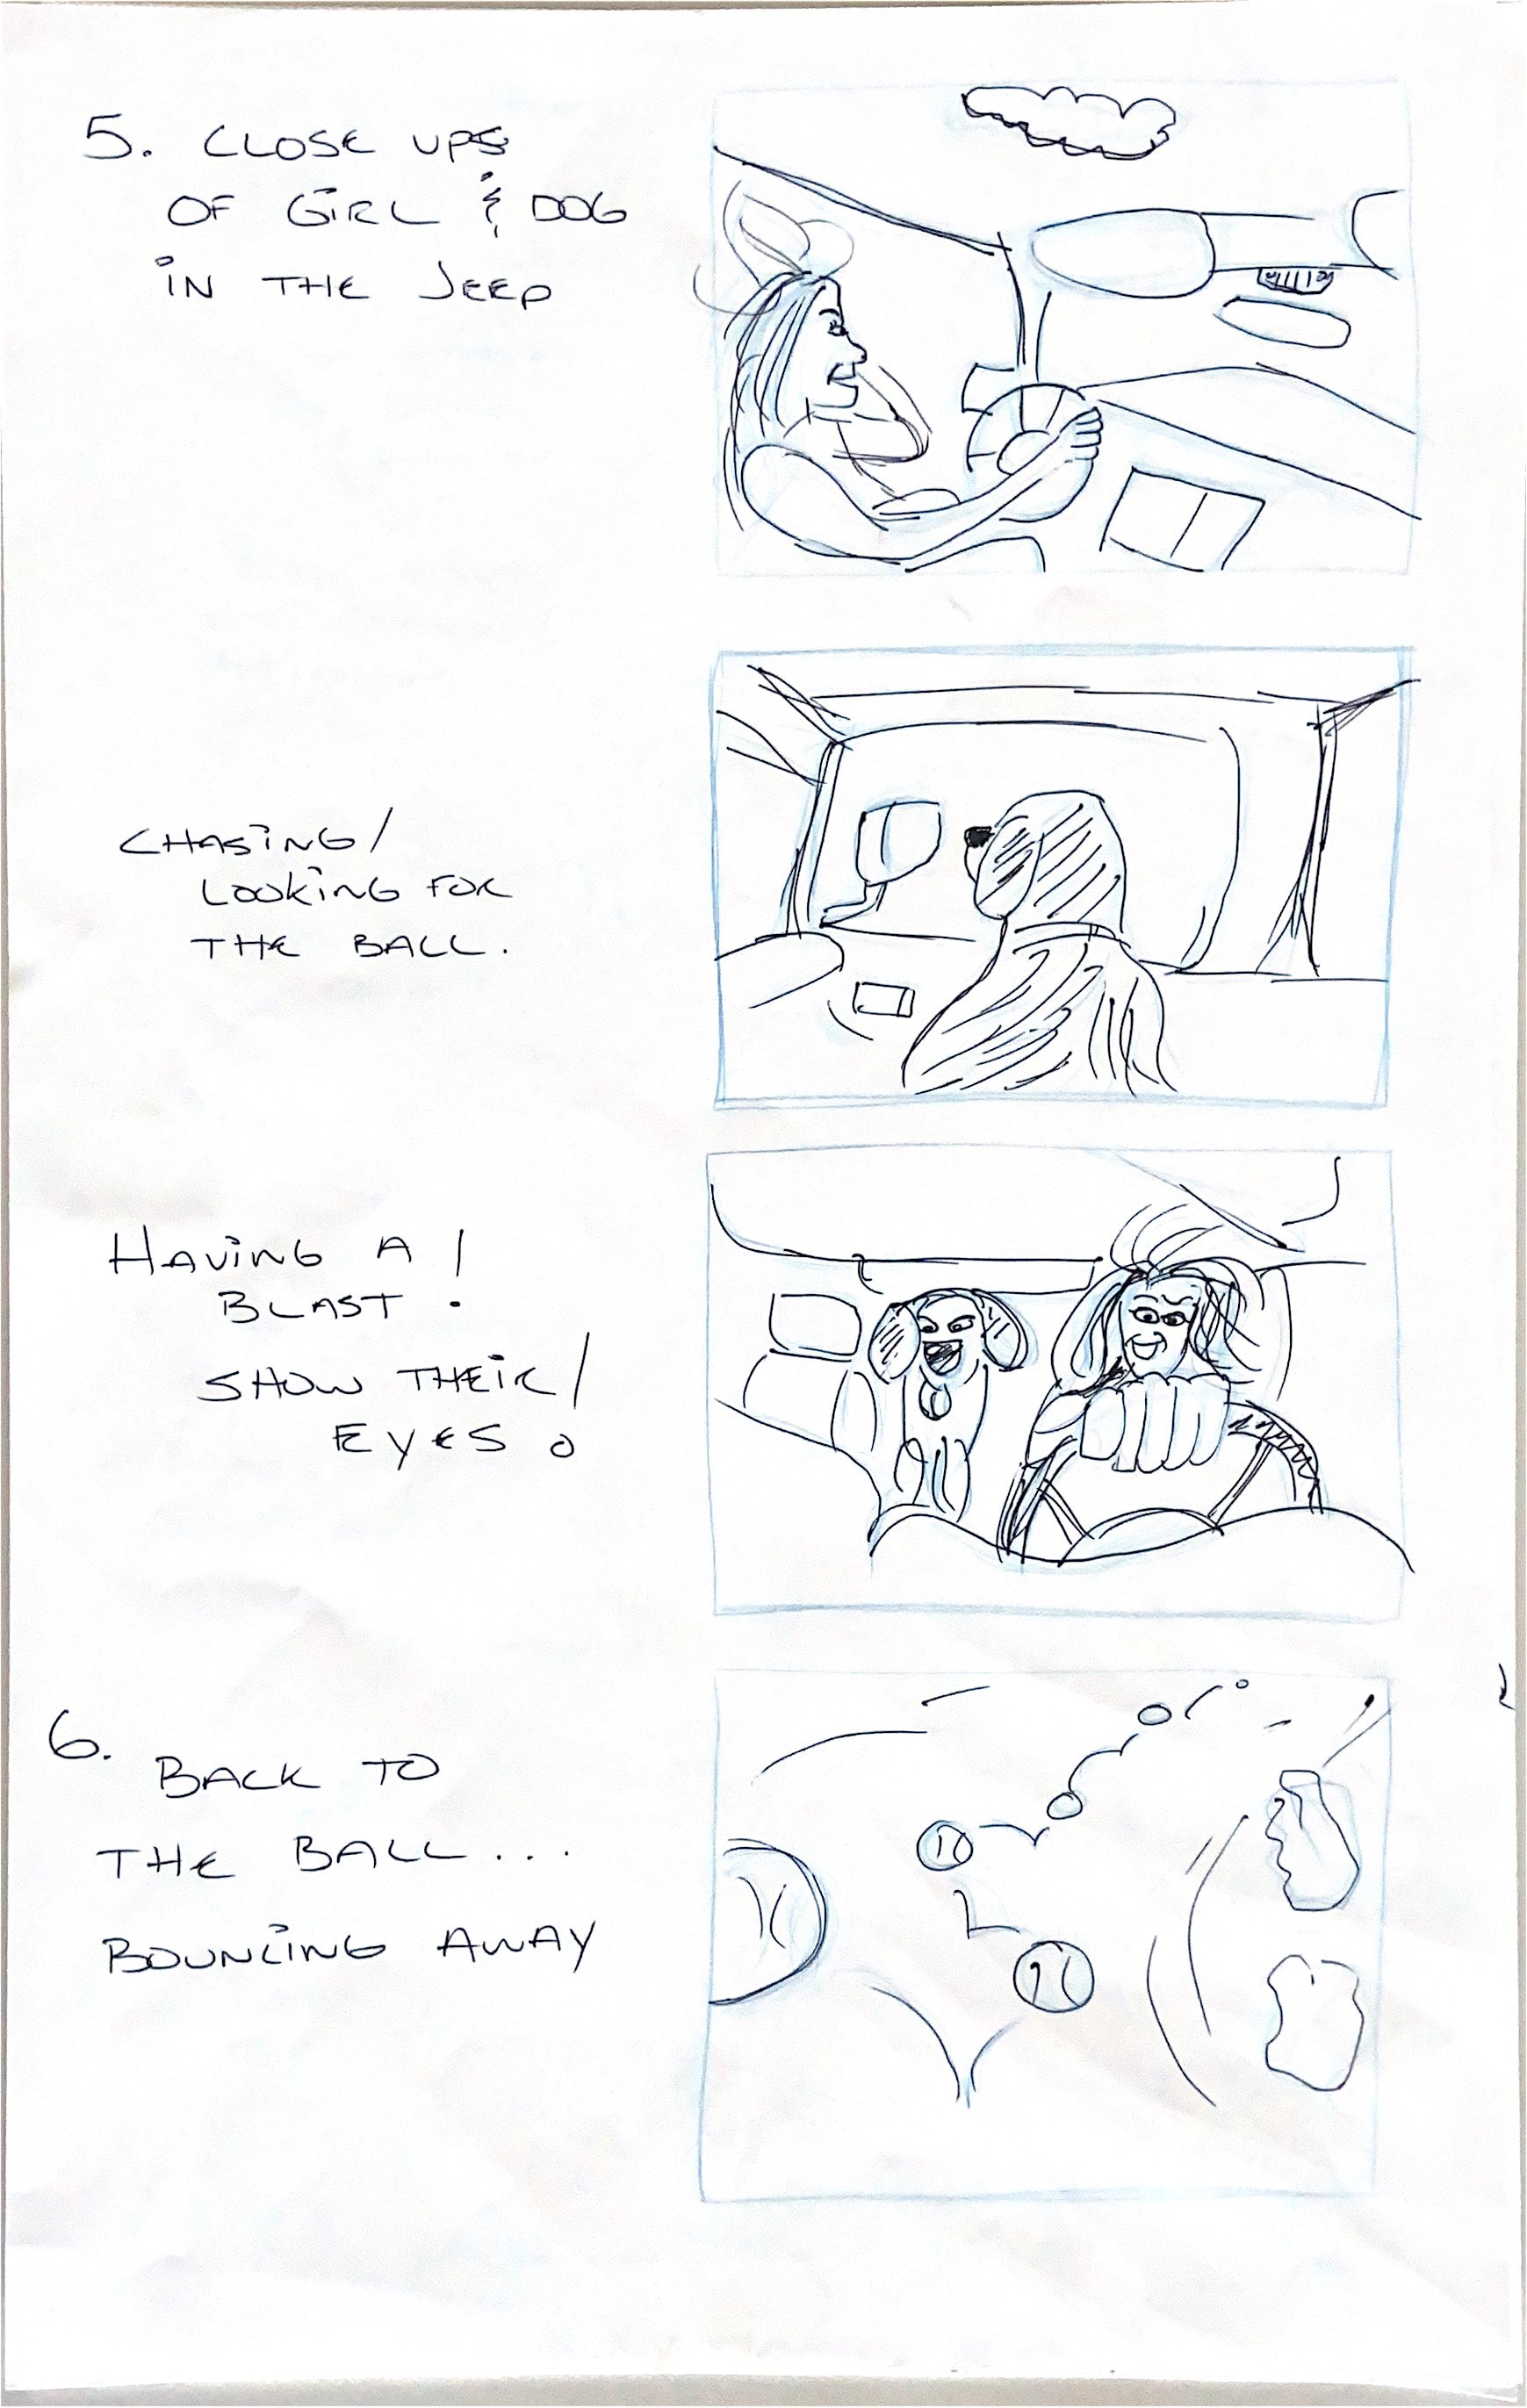 Jeep Fetch Storyboards_Page_2_Image_0001_Johnny Michael.jpg